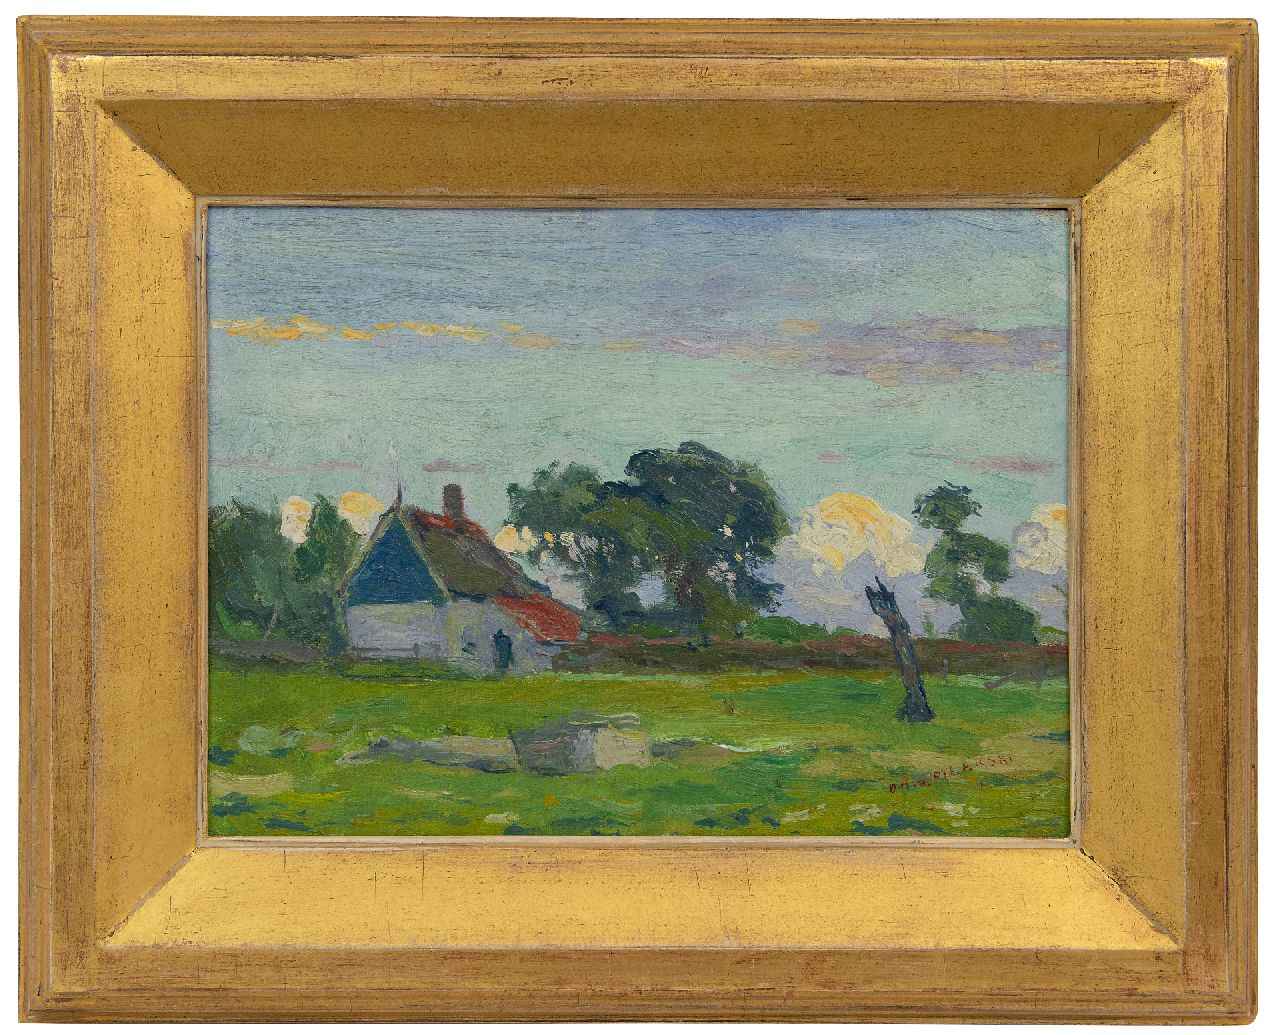 Filarski D.H.W.  | 'Dirk' Herman Willem Filarski | Paintings offered for sale | A farmhouse in summer, oil on canvas laid down on board 25.4 x 34.0 cm, signed l.r. and painted ca. 1908-1909